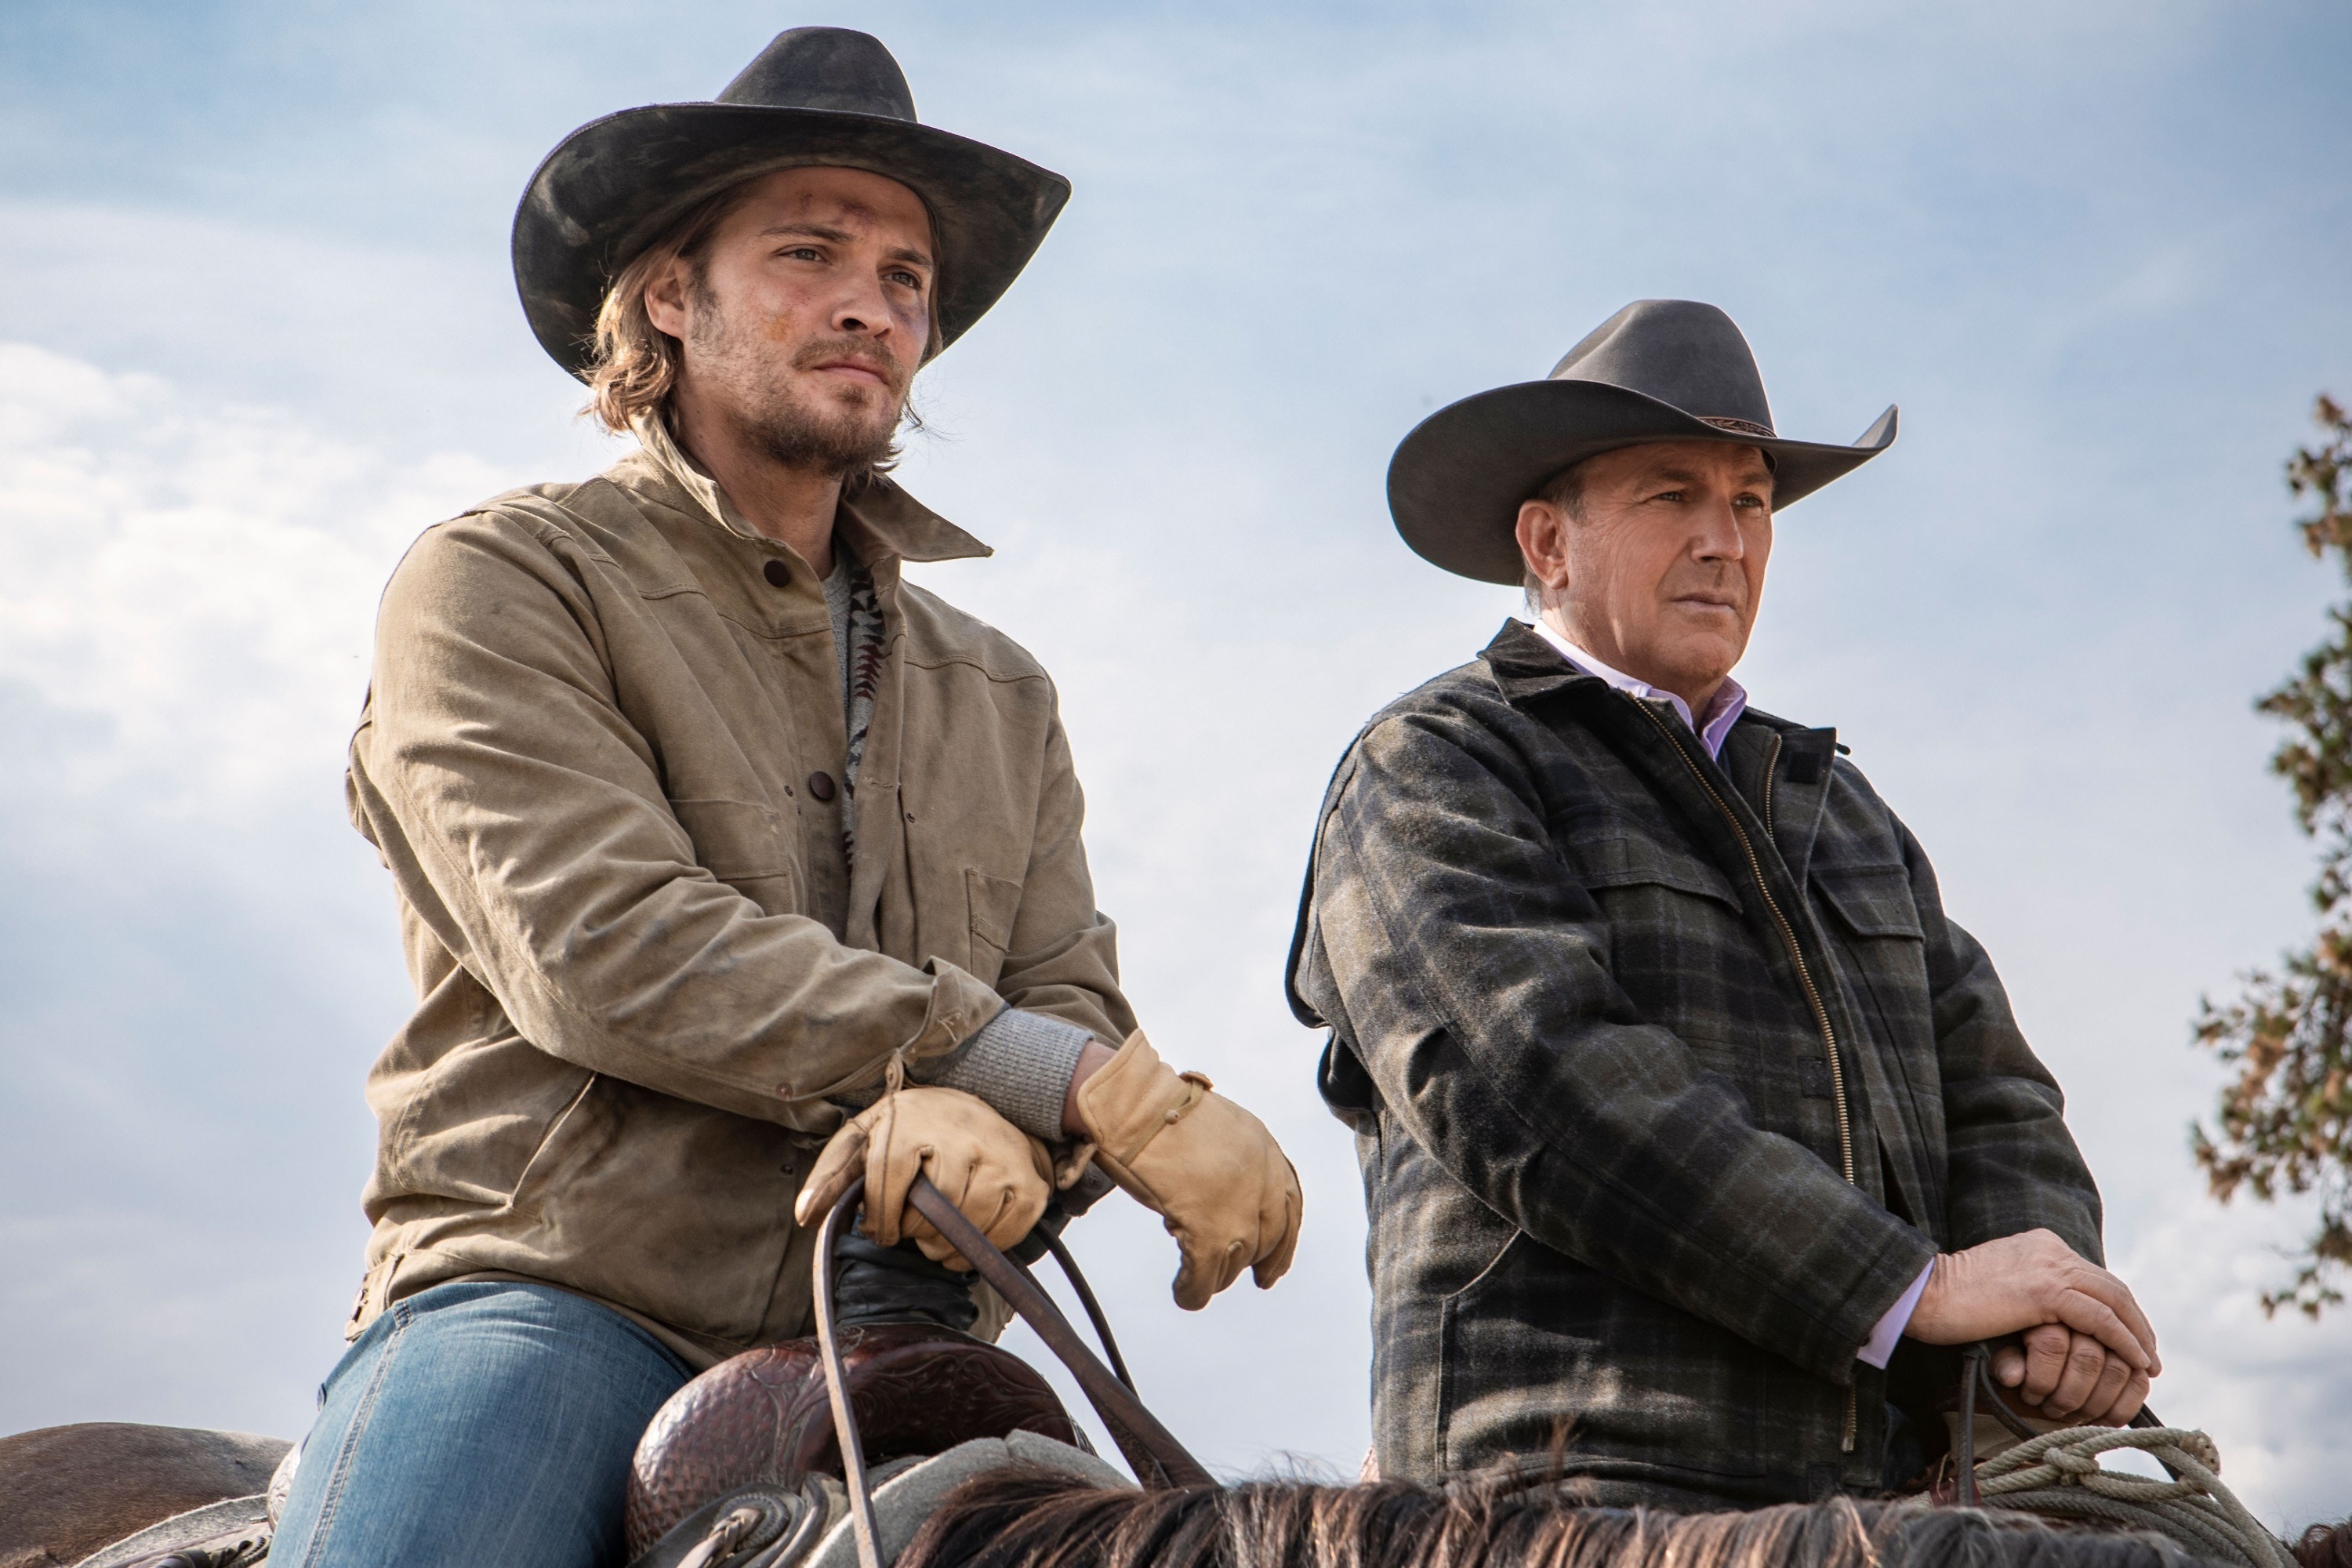 Luke Grimes and Kevin Costner next to each other on horses